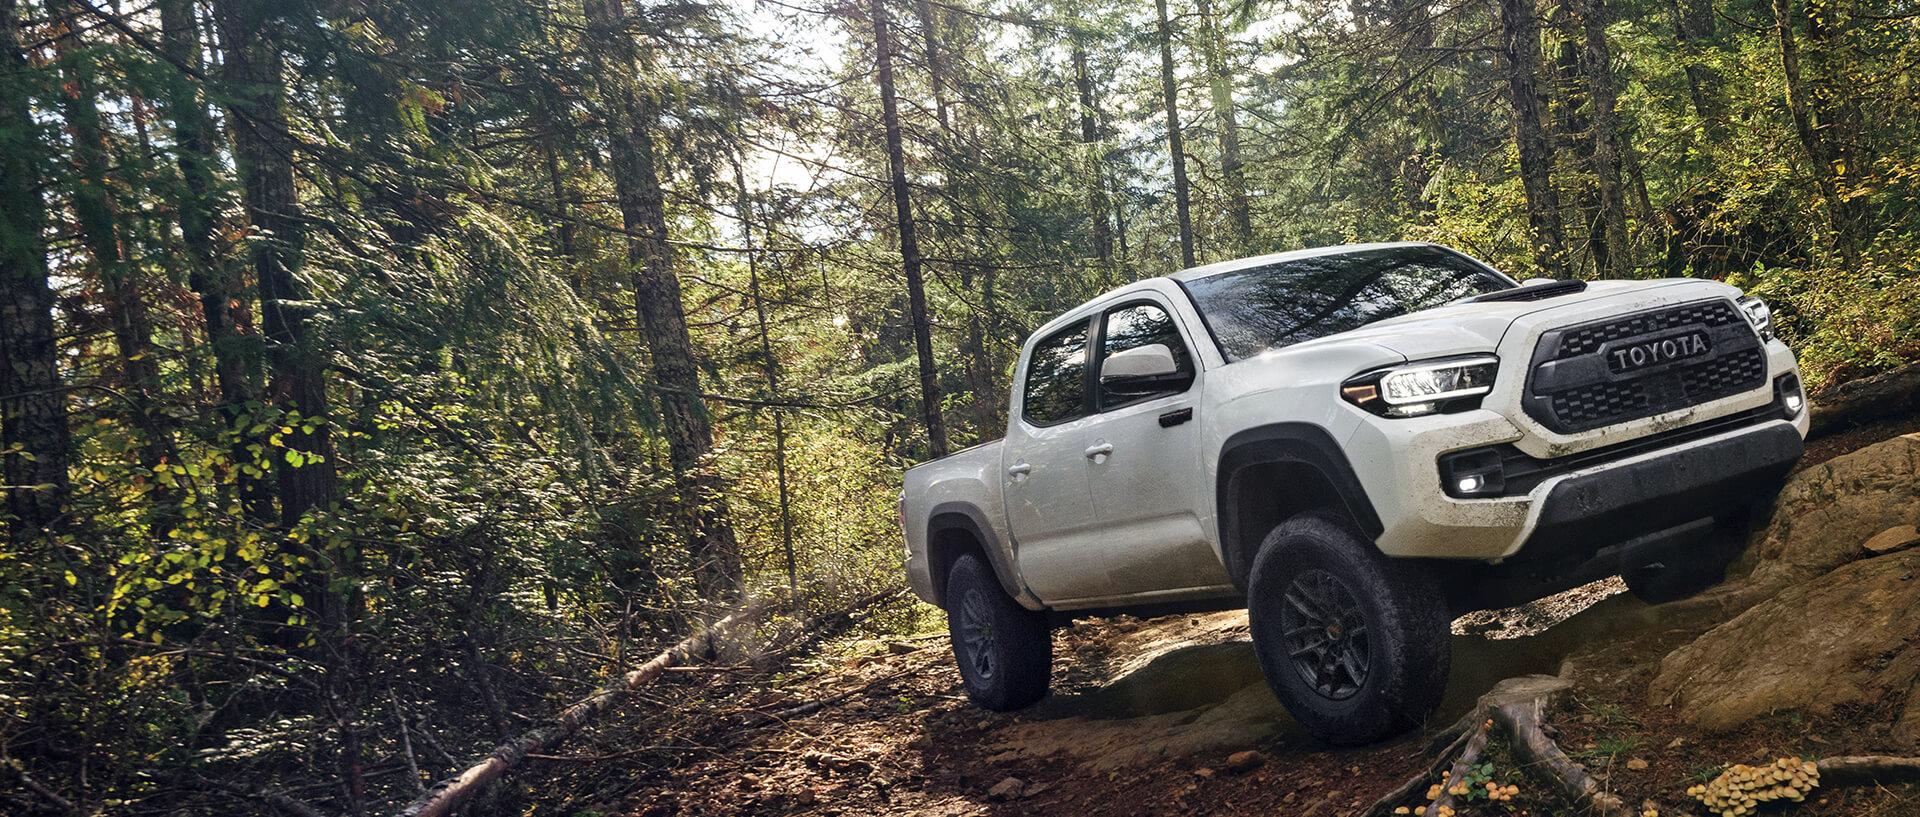 Toyota Truck in the woods